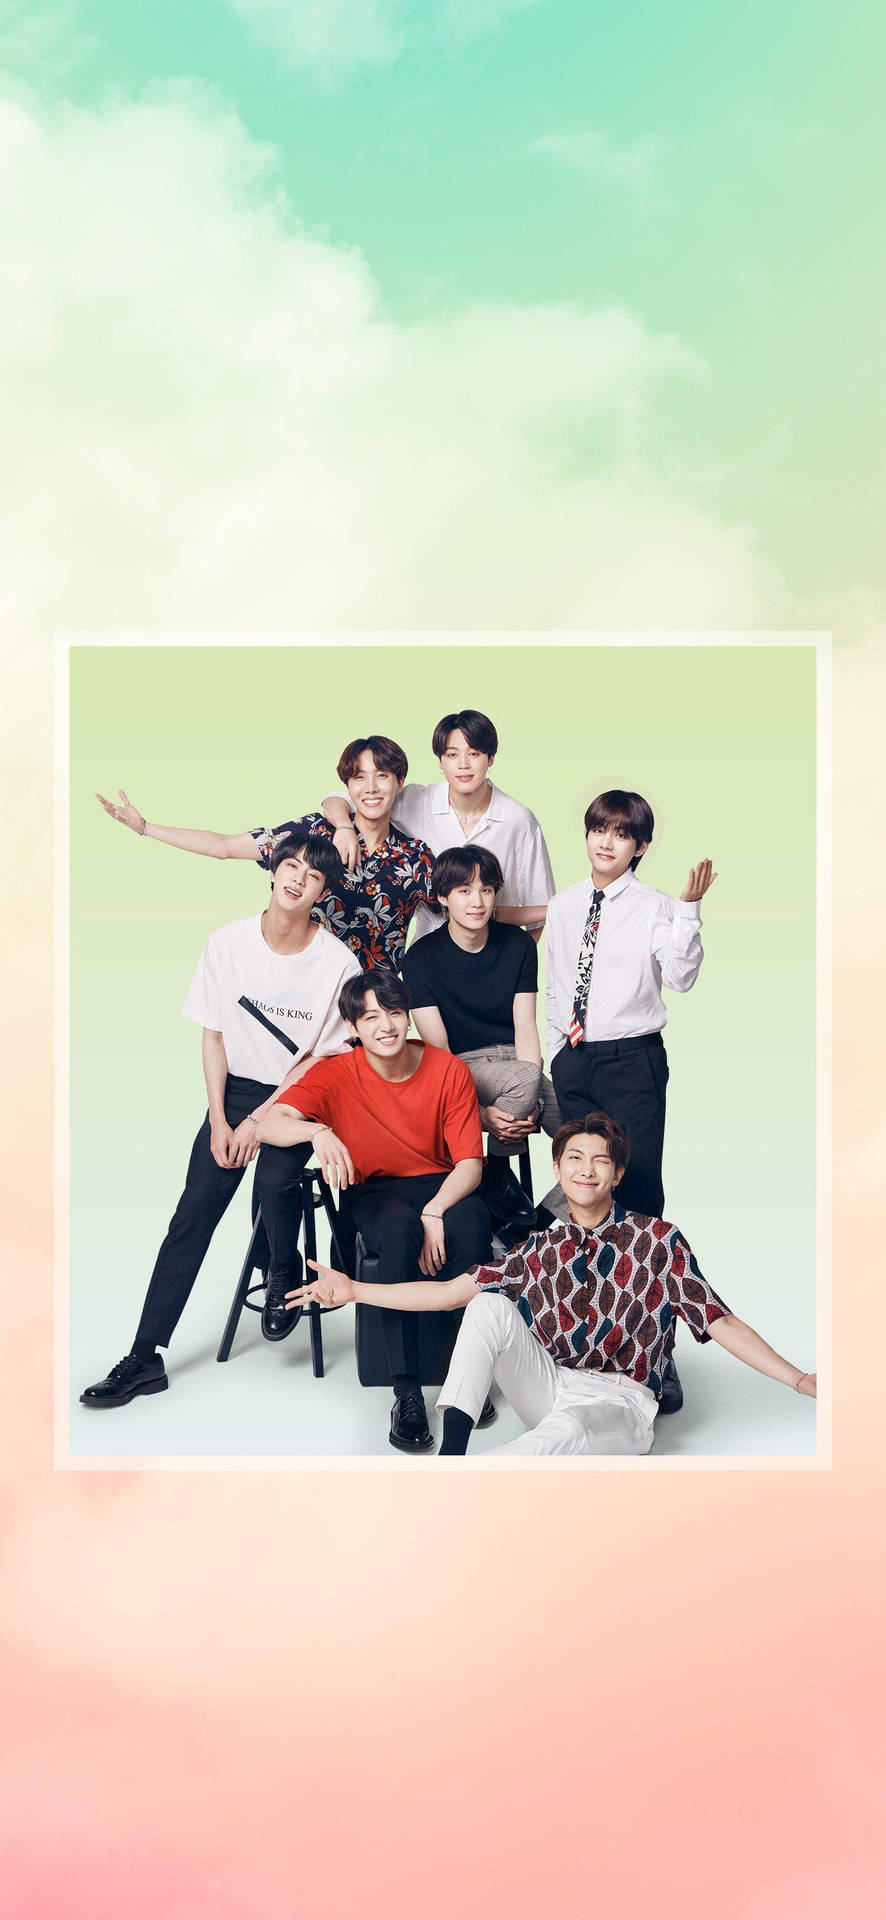 Casual Bts Dynamite Group Photo Wallpaper